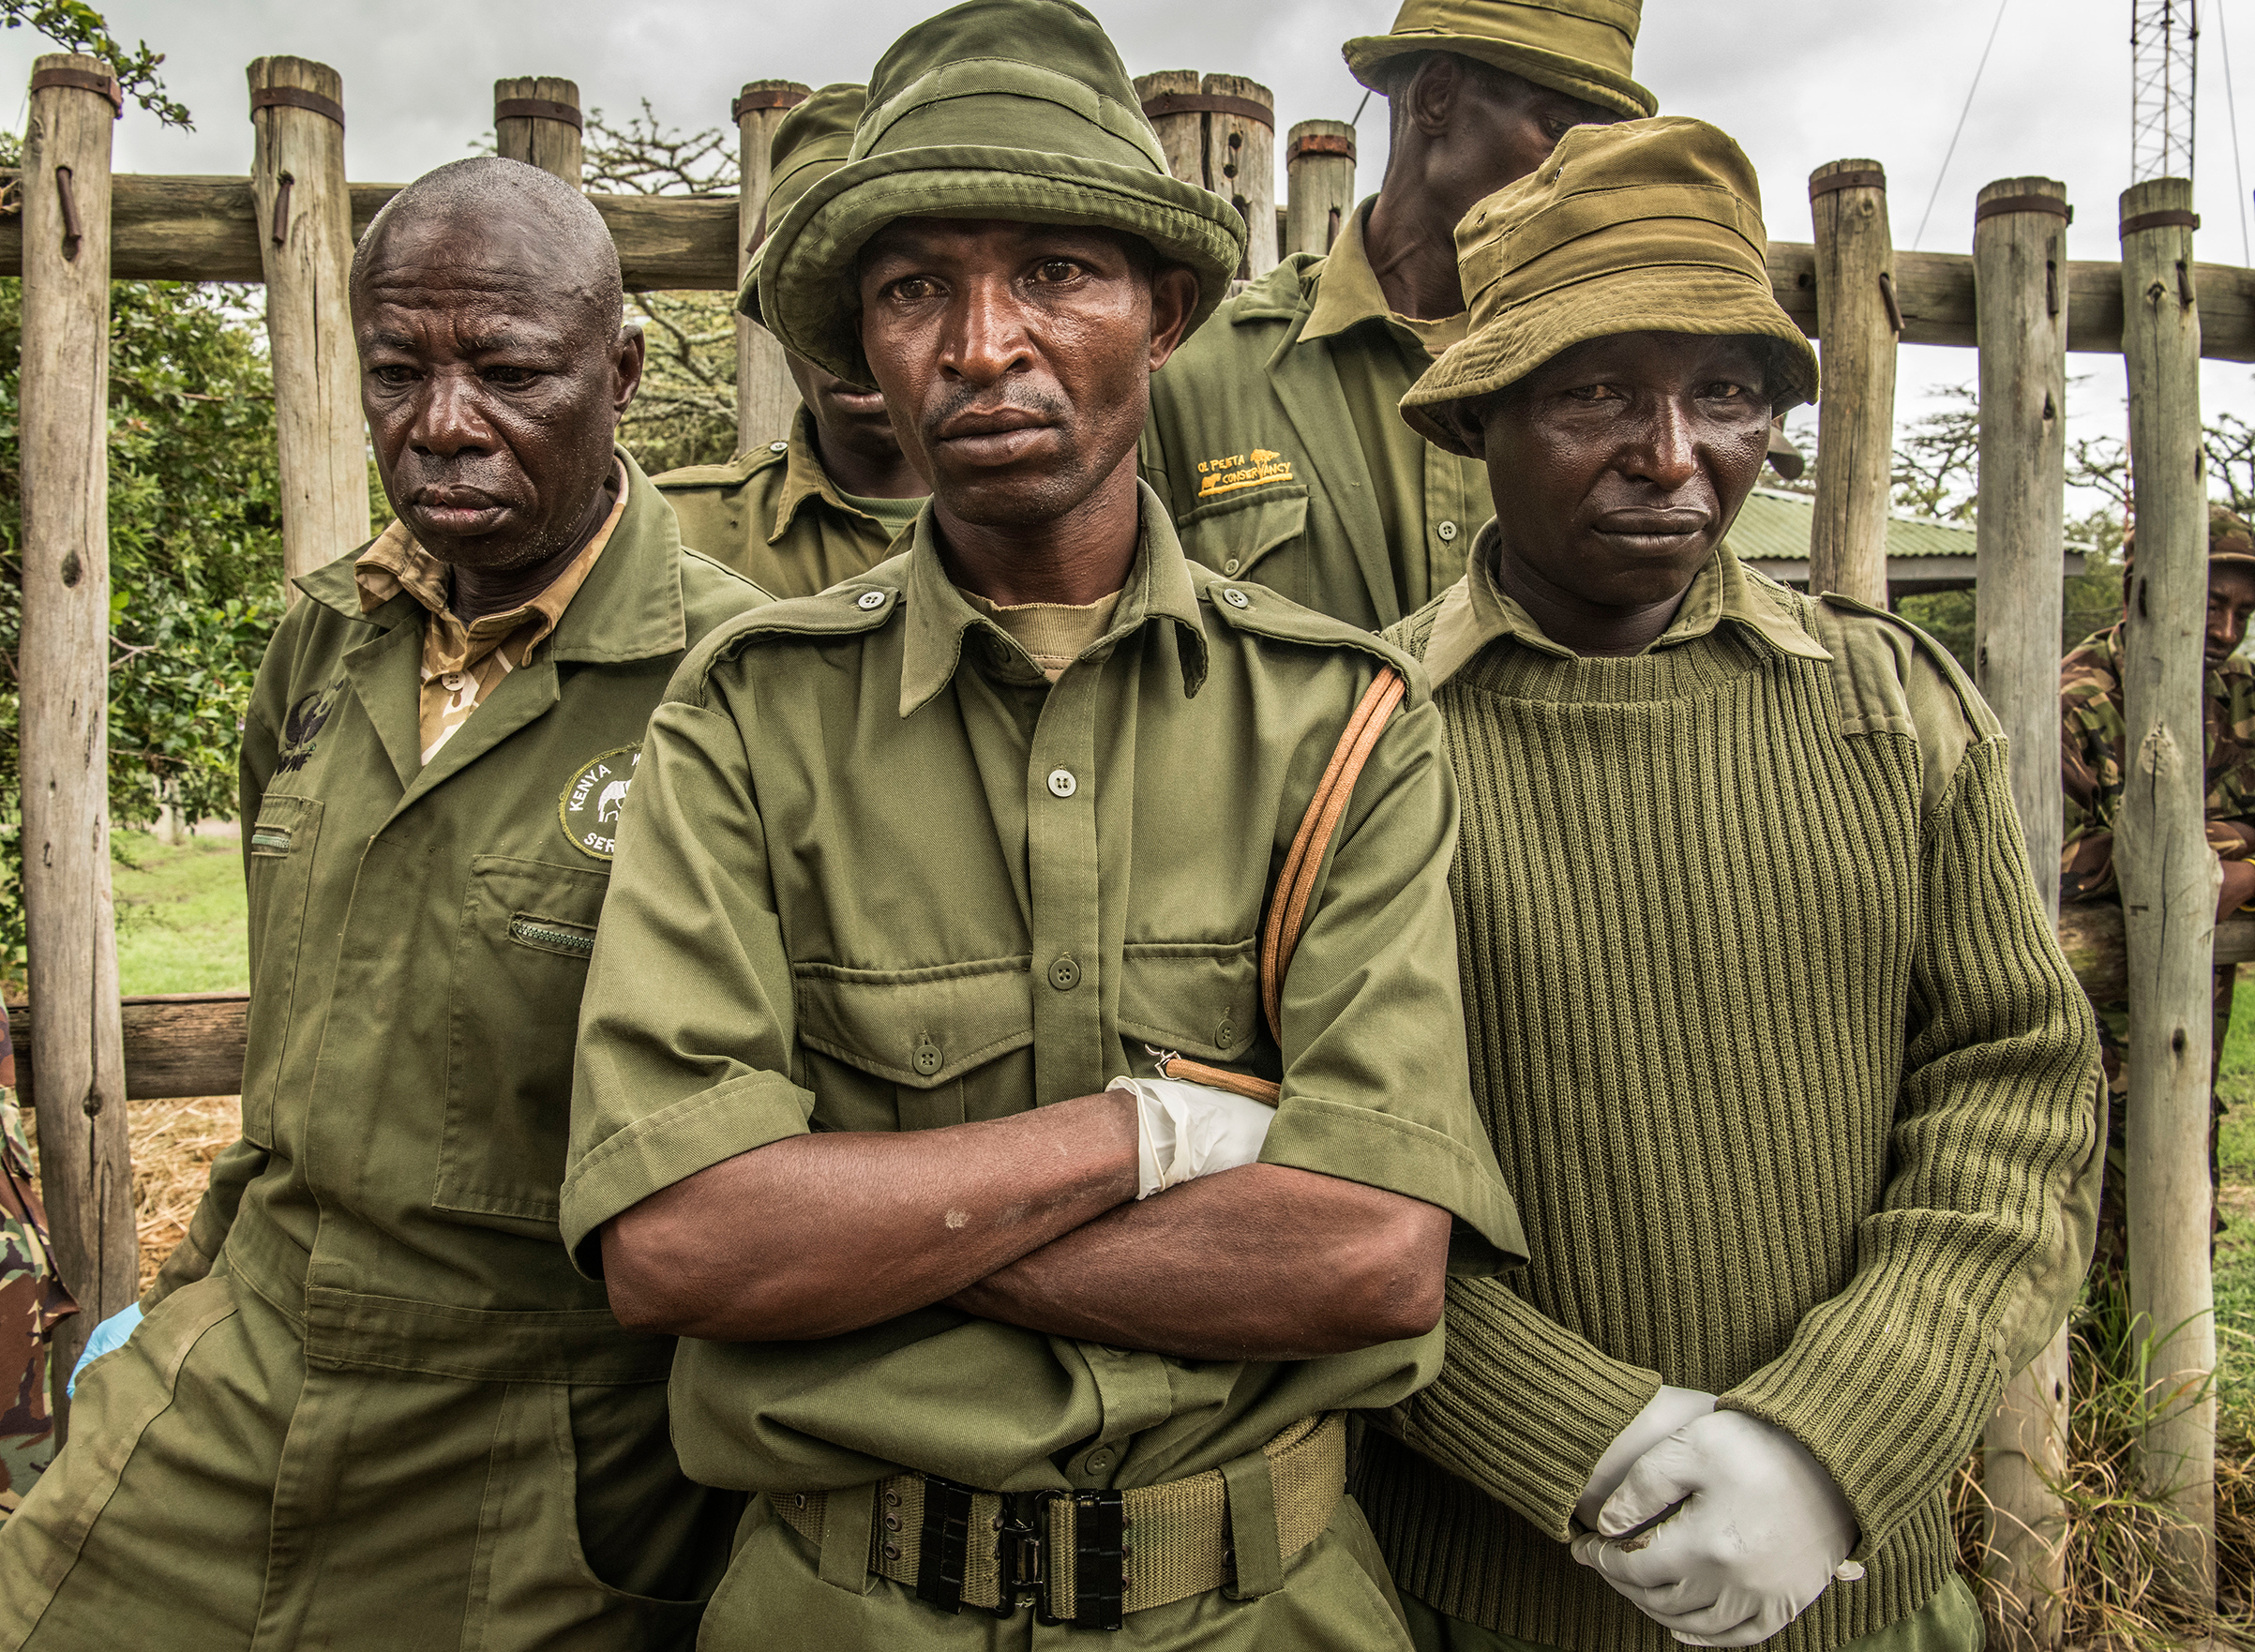 Wildlife rangers mourn the passing of Sudan, the last male Northern White Rhino on the planet. (Ami Vitale—National Geographic Creative)